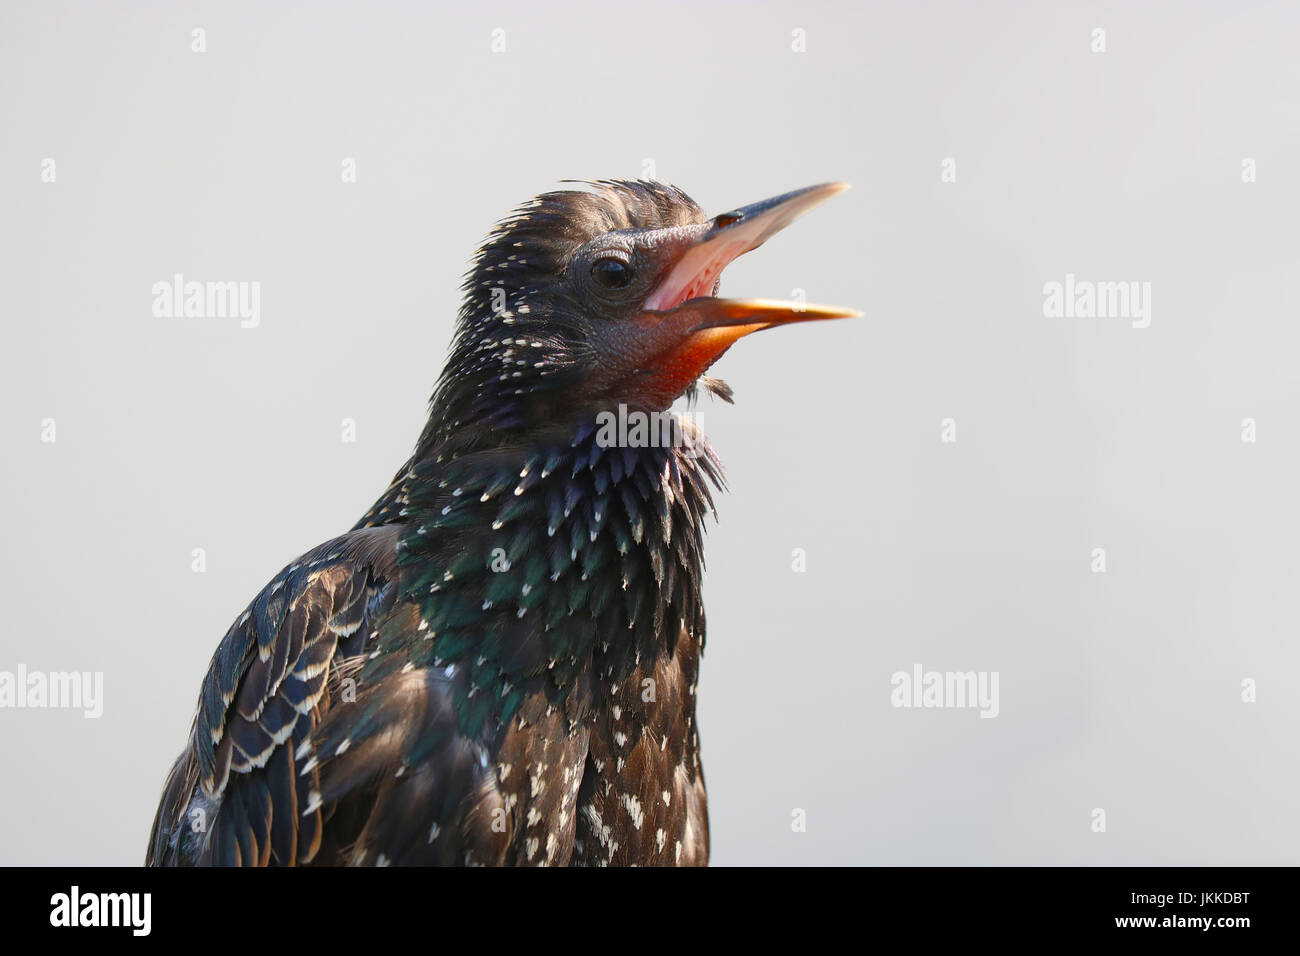 loud twittering angry young juvenile starling bird in the bright sun Stock Photo